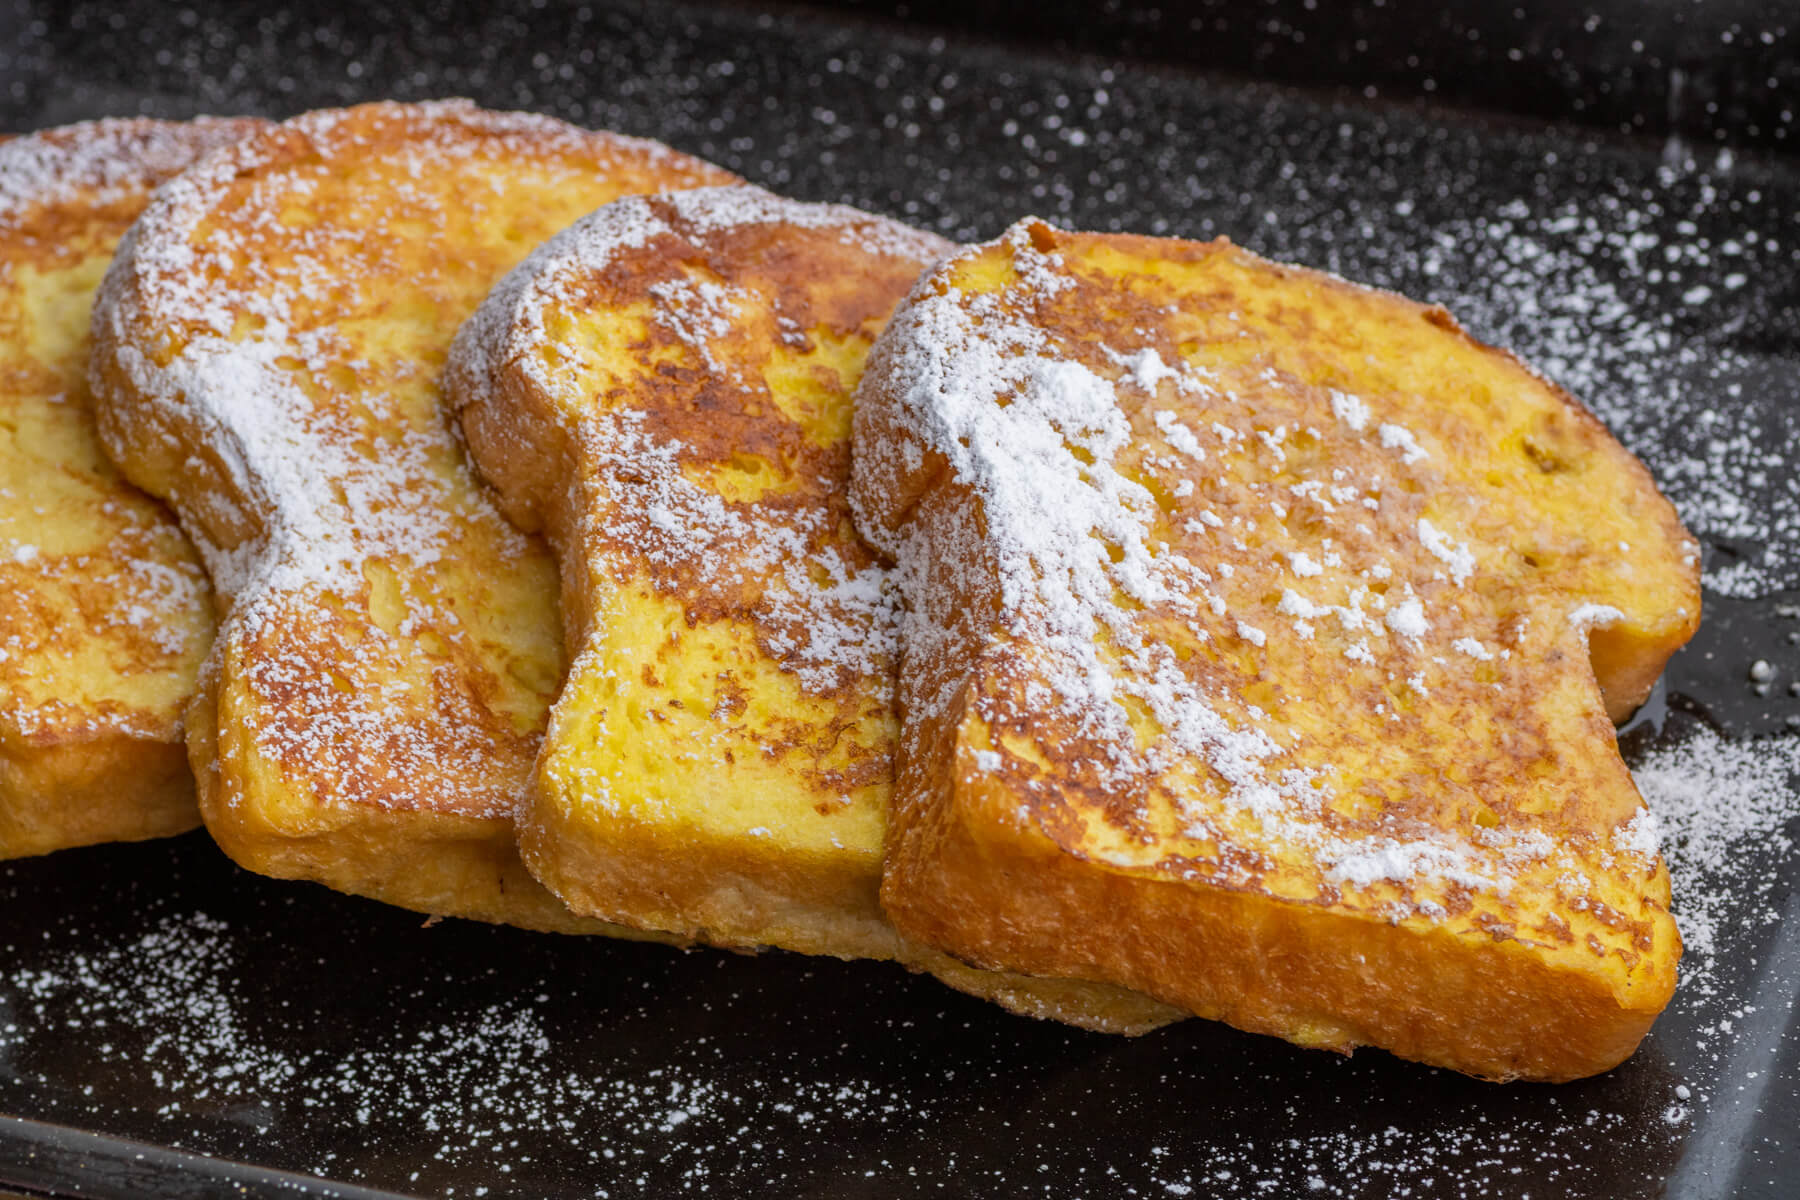 A black tray containing slices of golden Brioche French toast dusted with confectioner's sugar.